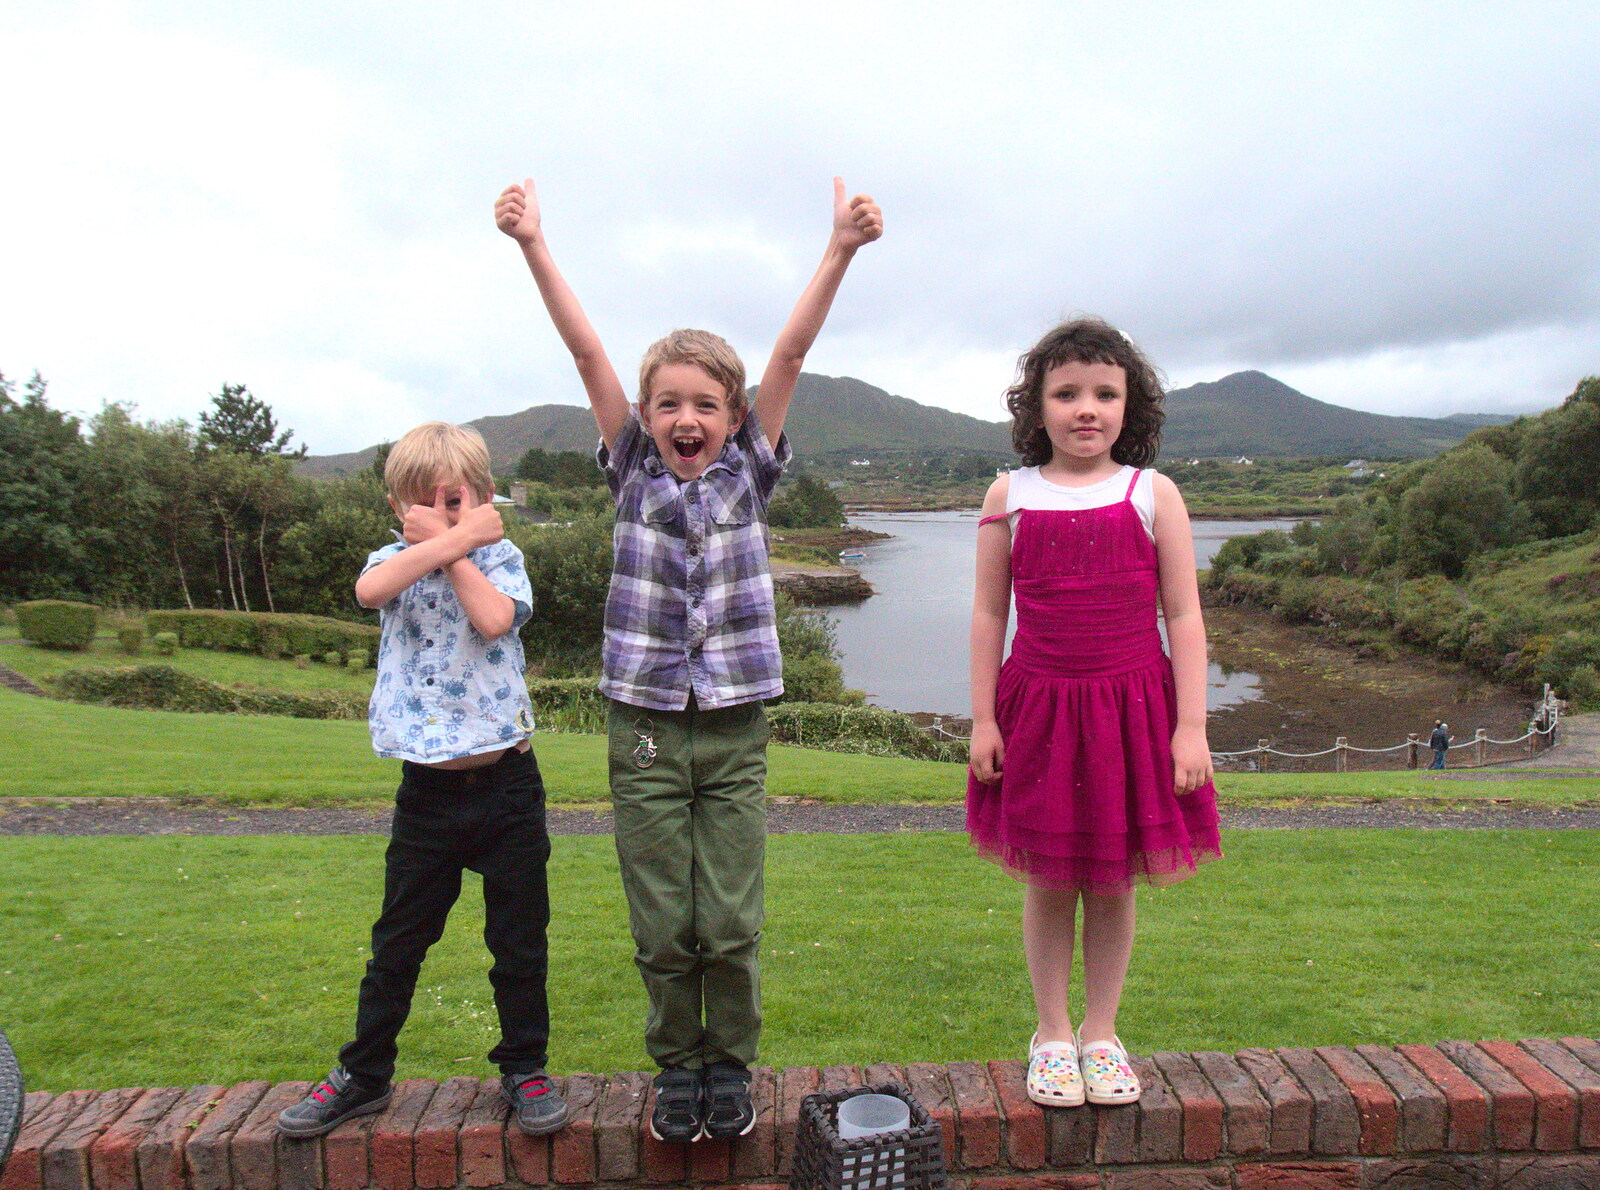 Harry, Fred and Fern stand on the wall from In The Sneem, An tSnaidhm, Kerry, Ireland - 1st August 2017